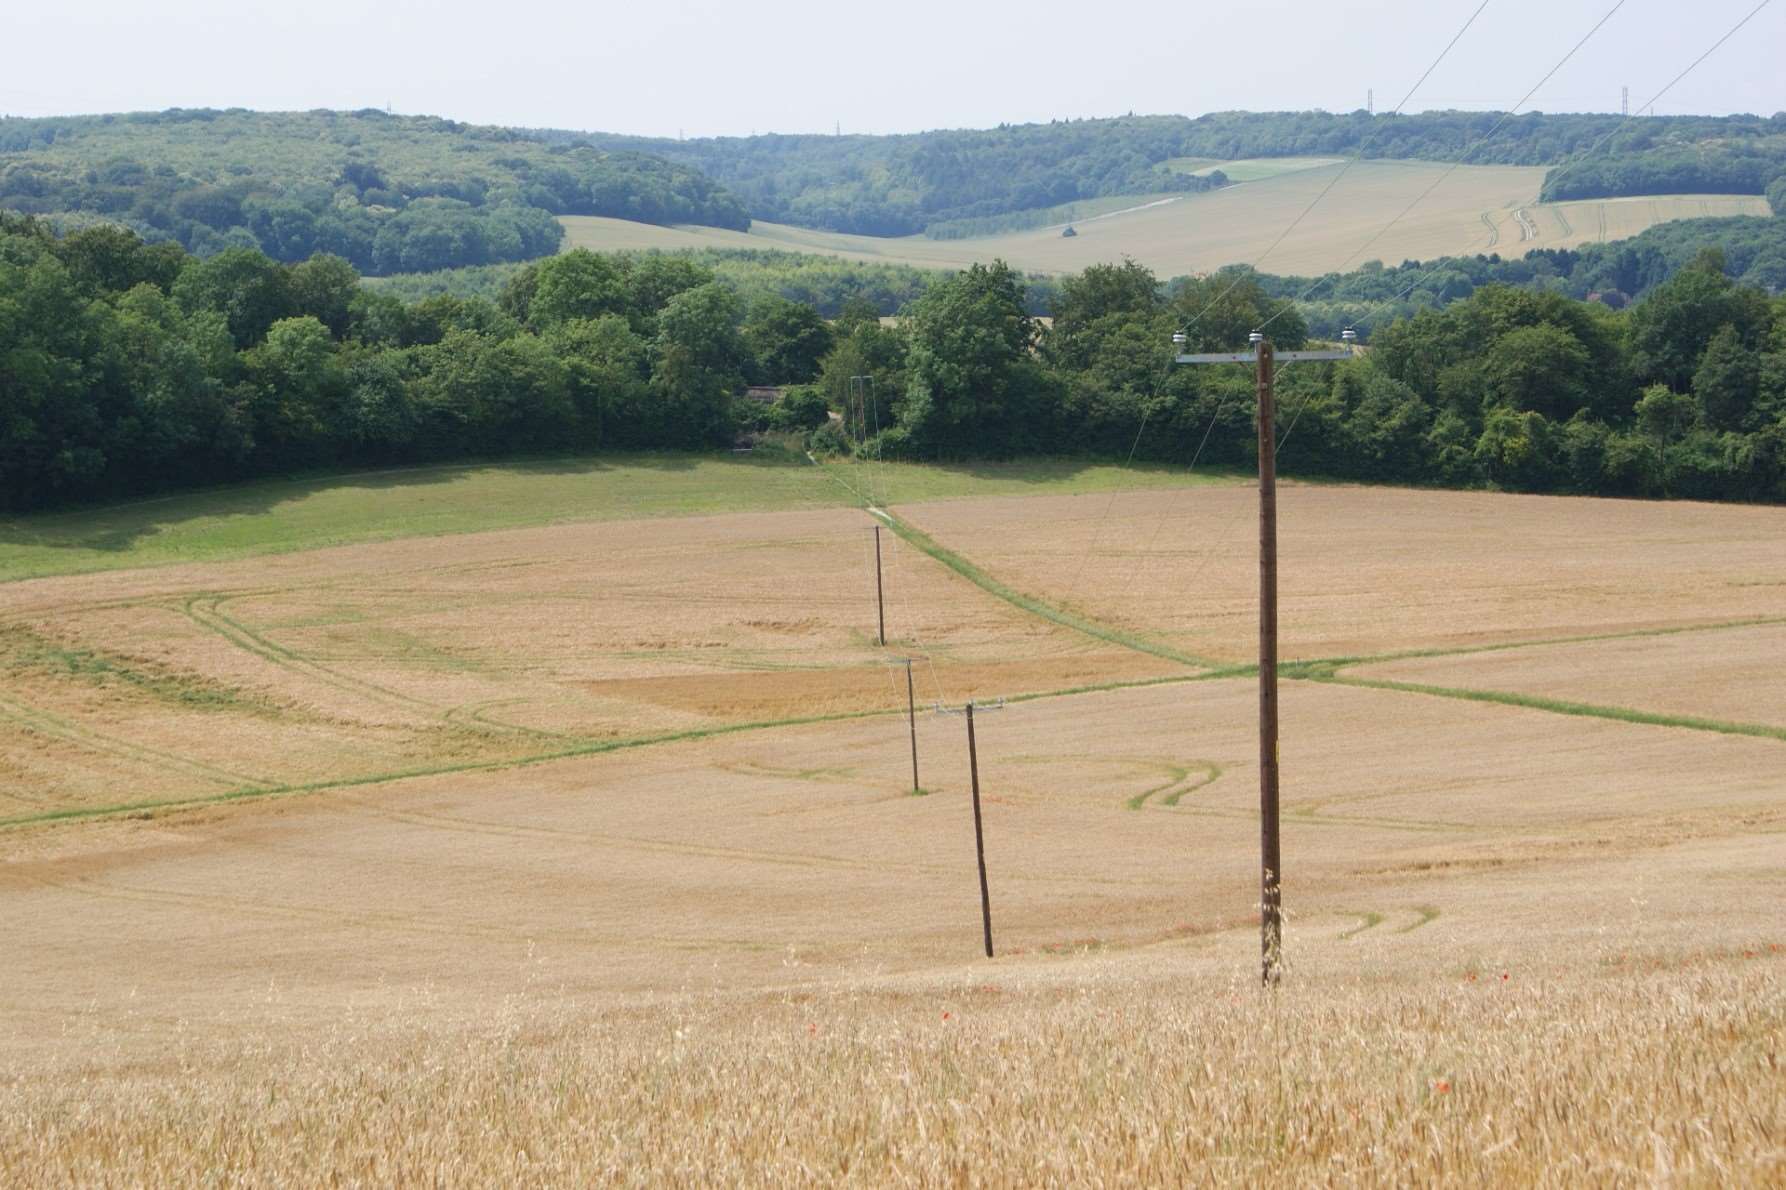 Ranscombe Farm before the power lines were removed